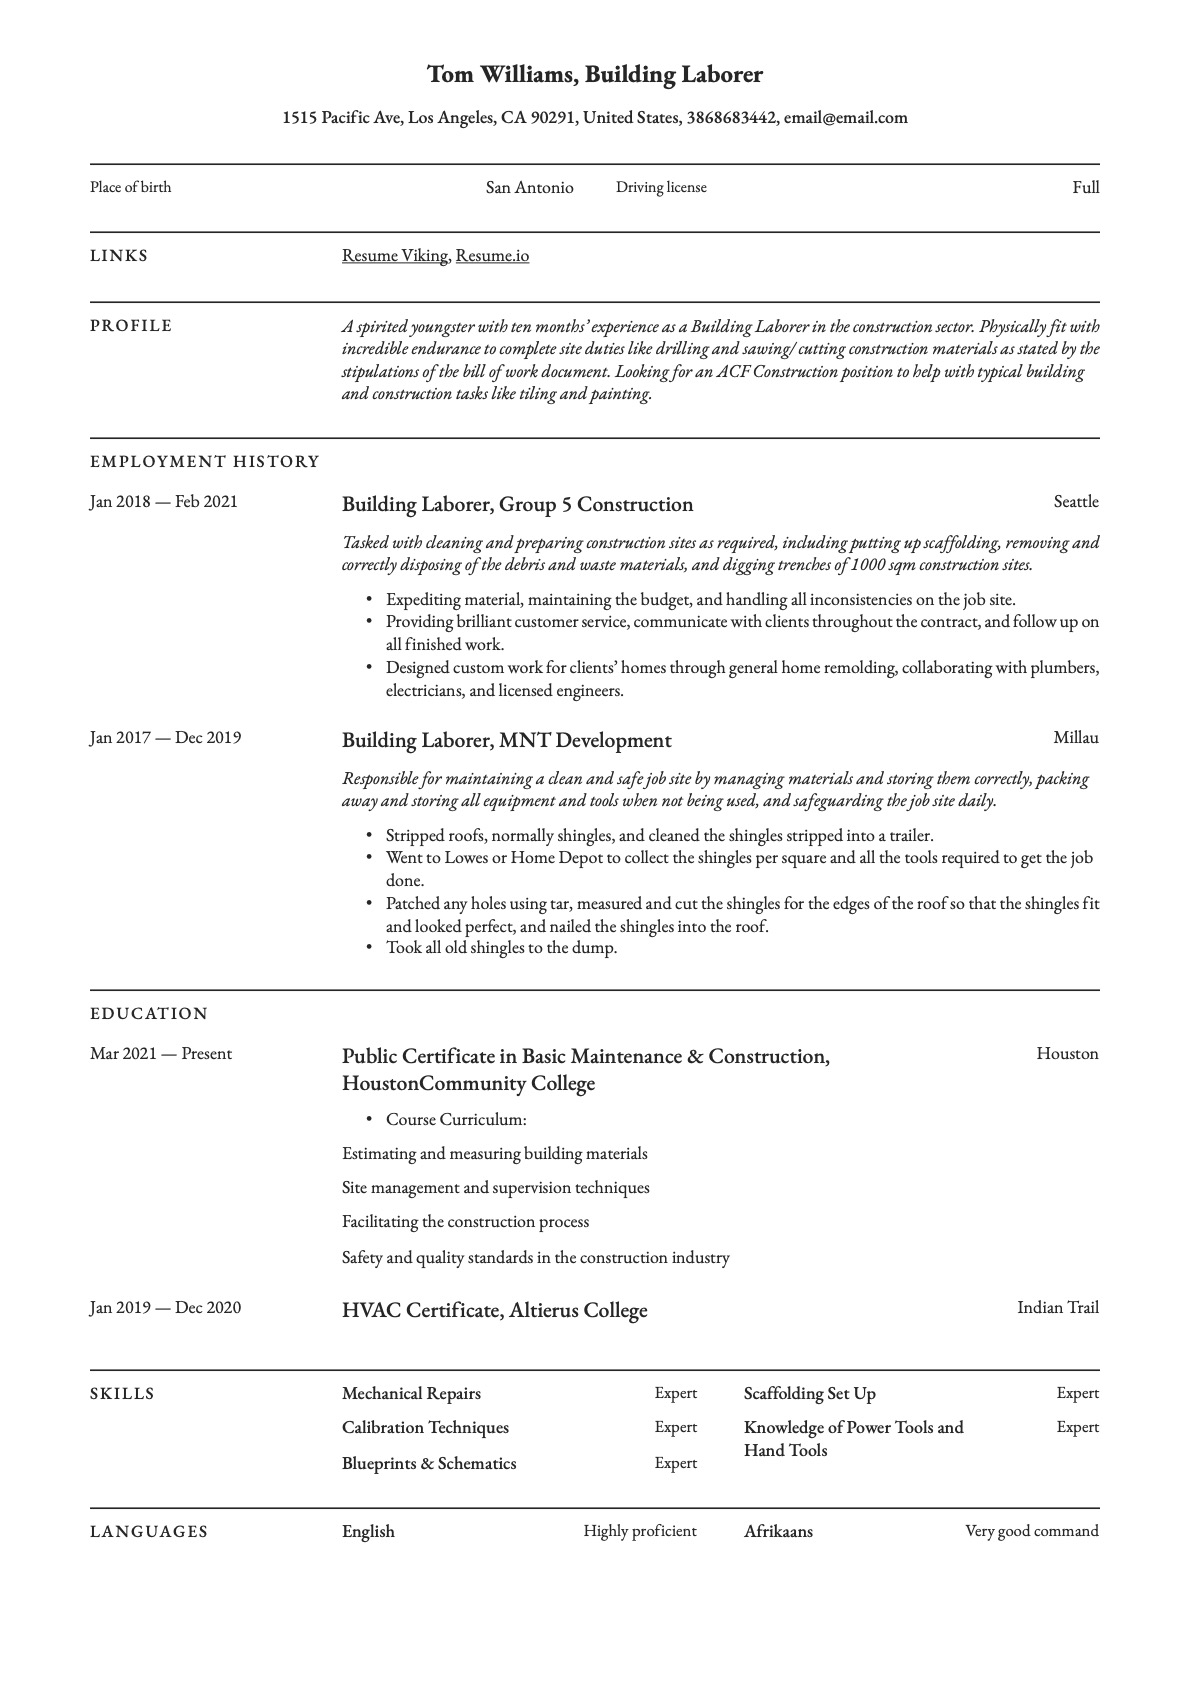 Example Resume Building Laborer-5